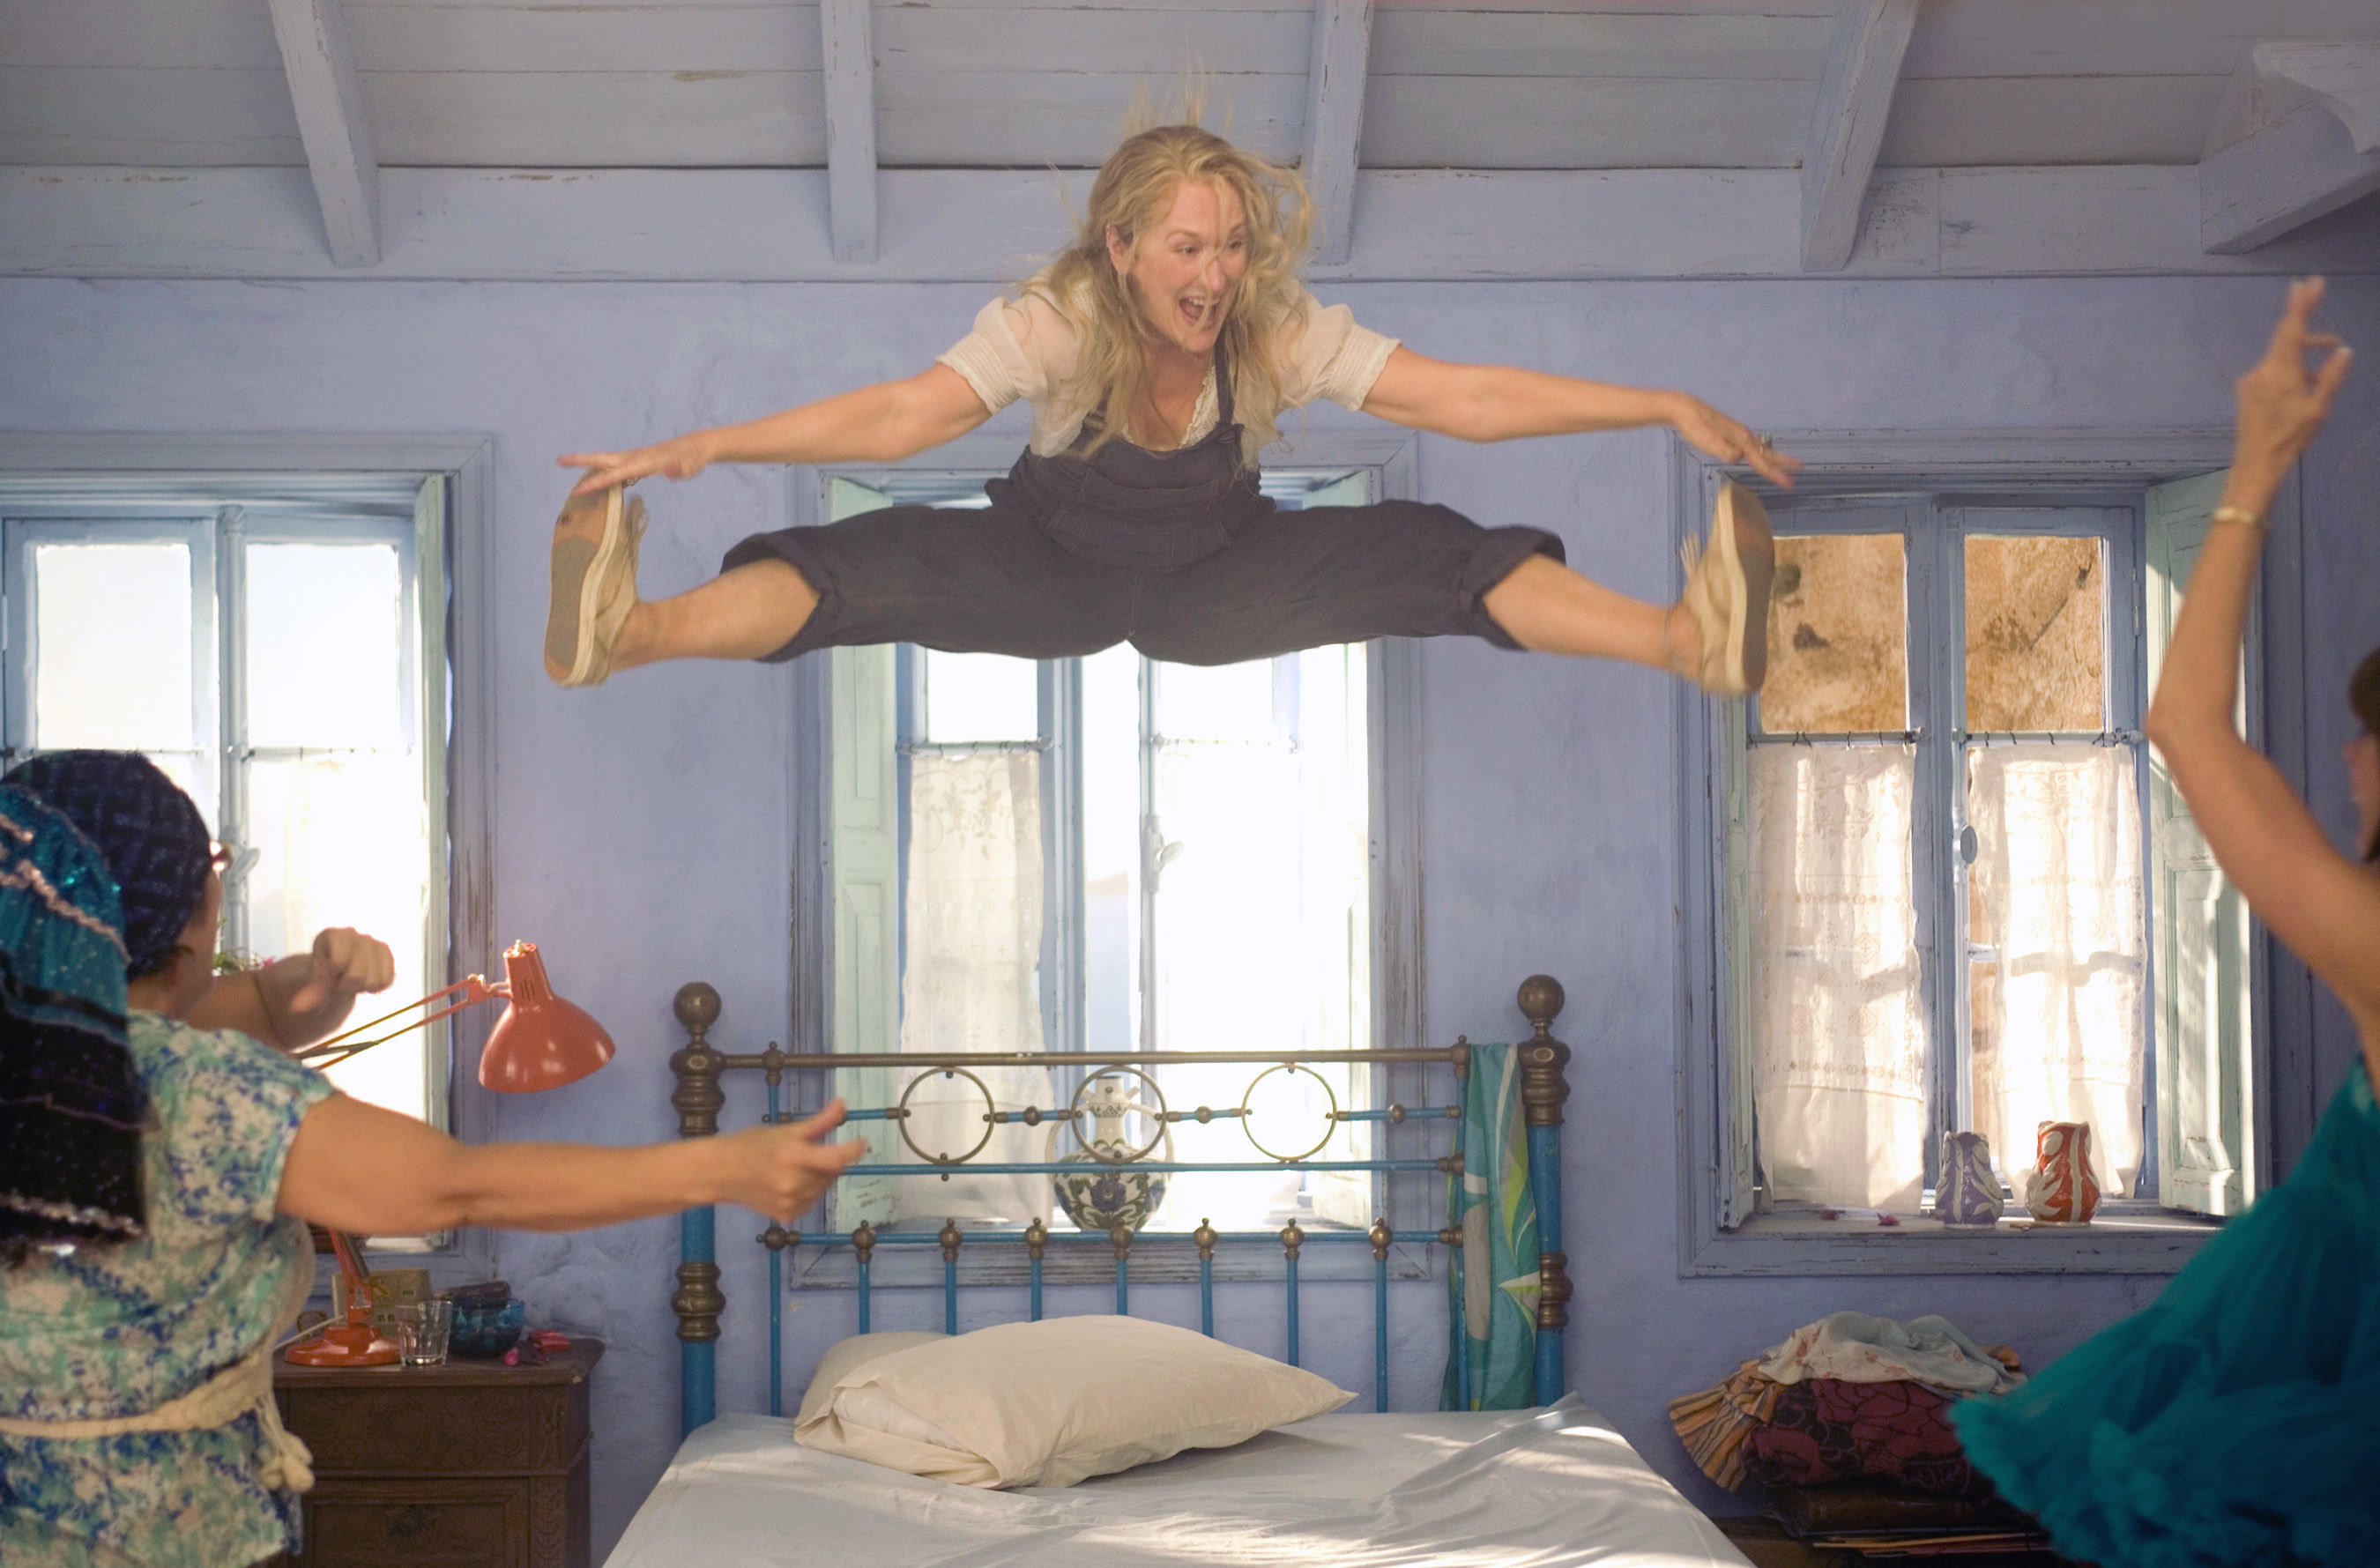 A woman jumps and dances playfully on a bed